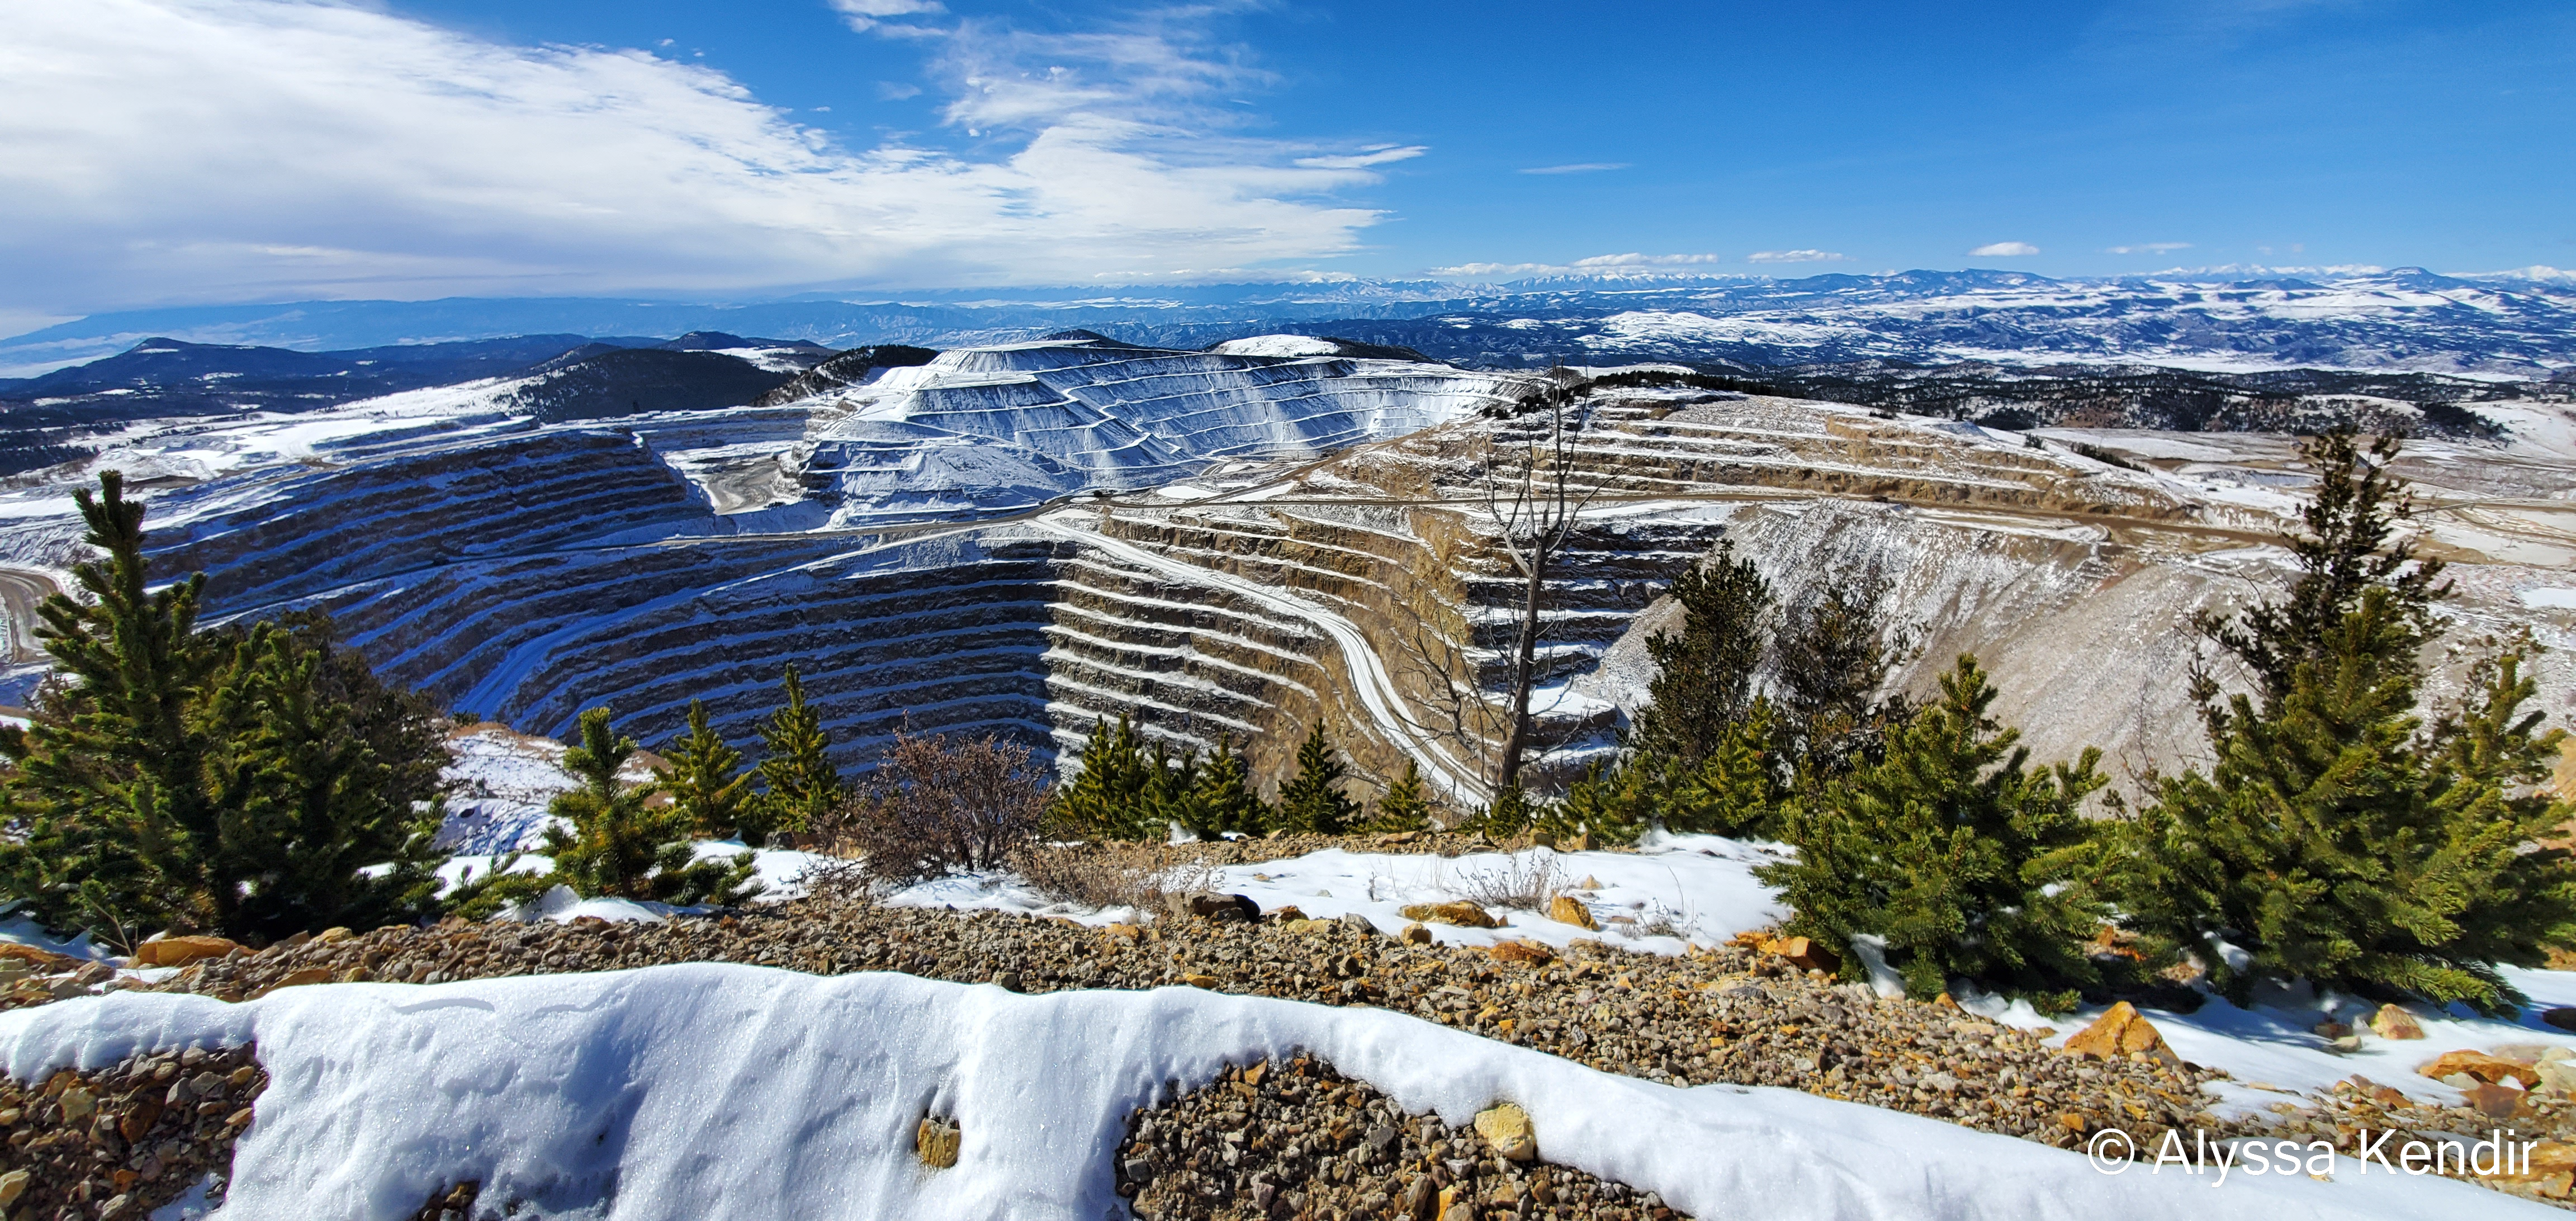 Honorable mention photo by Alyssa Kendir : Cripple Creek & Victor Overlook
Newmont's Cripple Creek & Victor Gold Mine during winter, taken from the public access overlook
